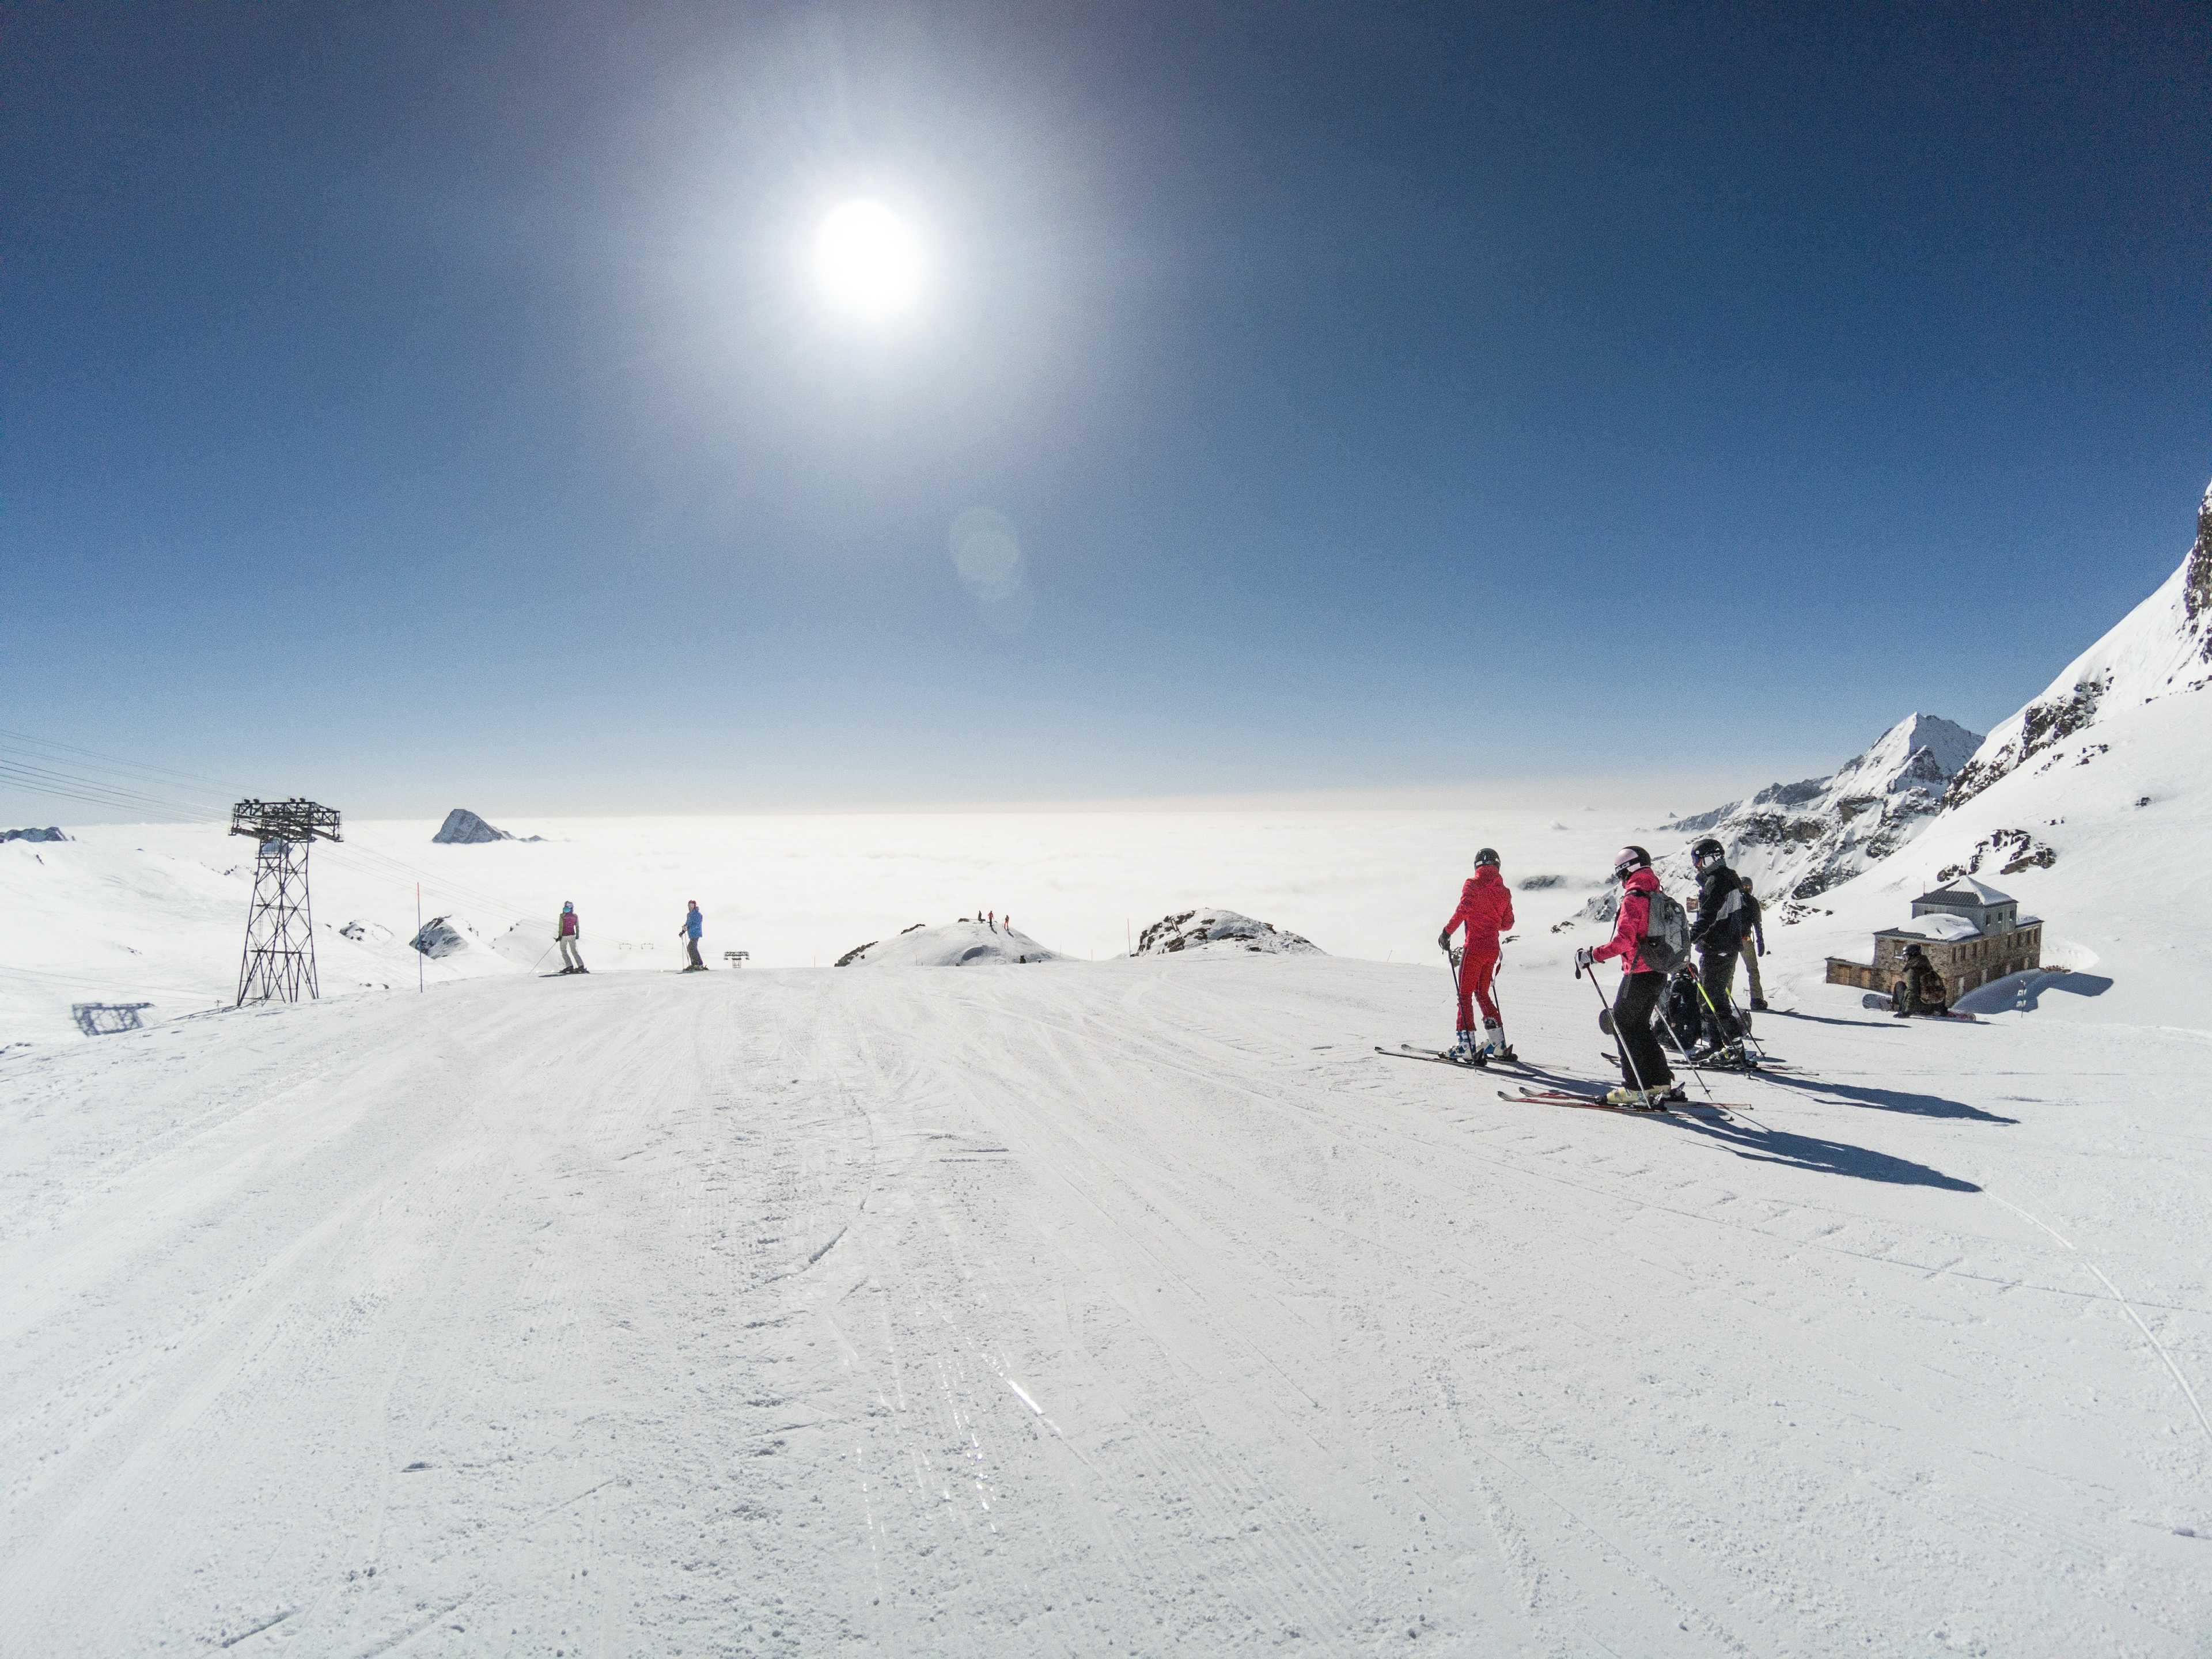 Being above the clouds is quite frequent at Monterosa Ski